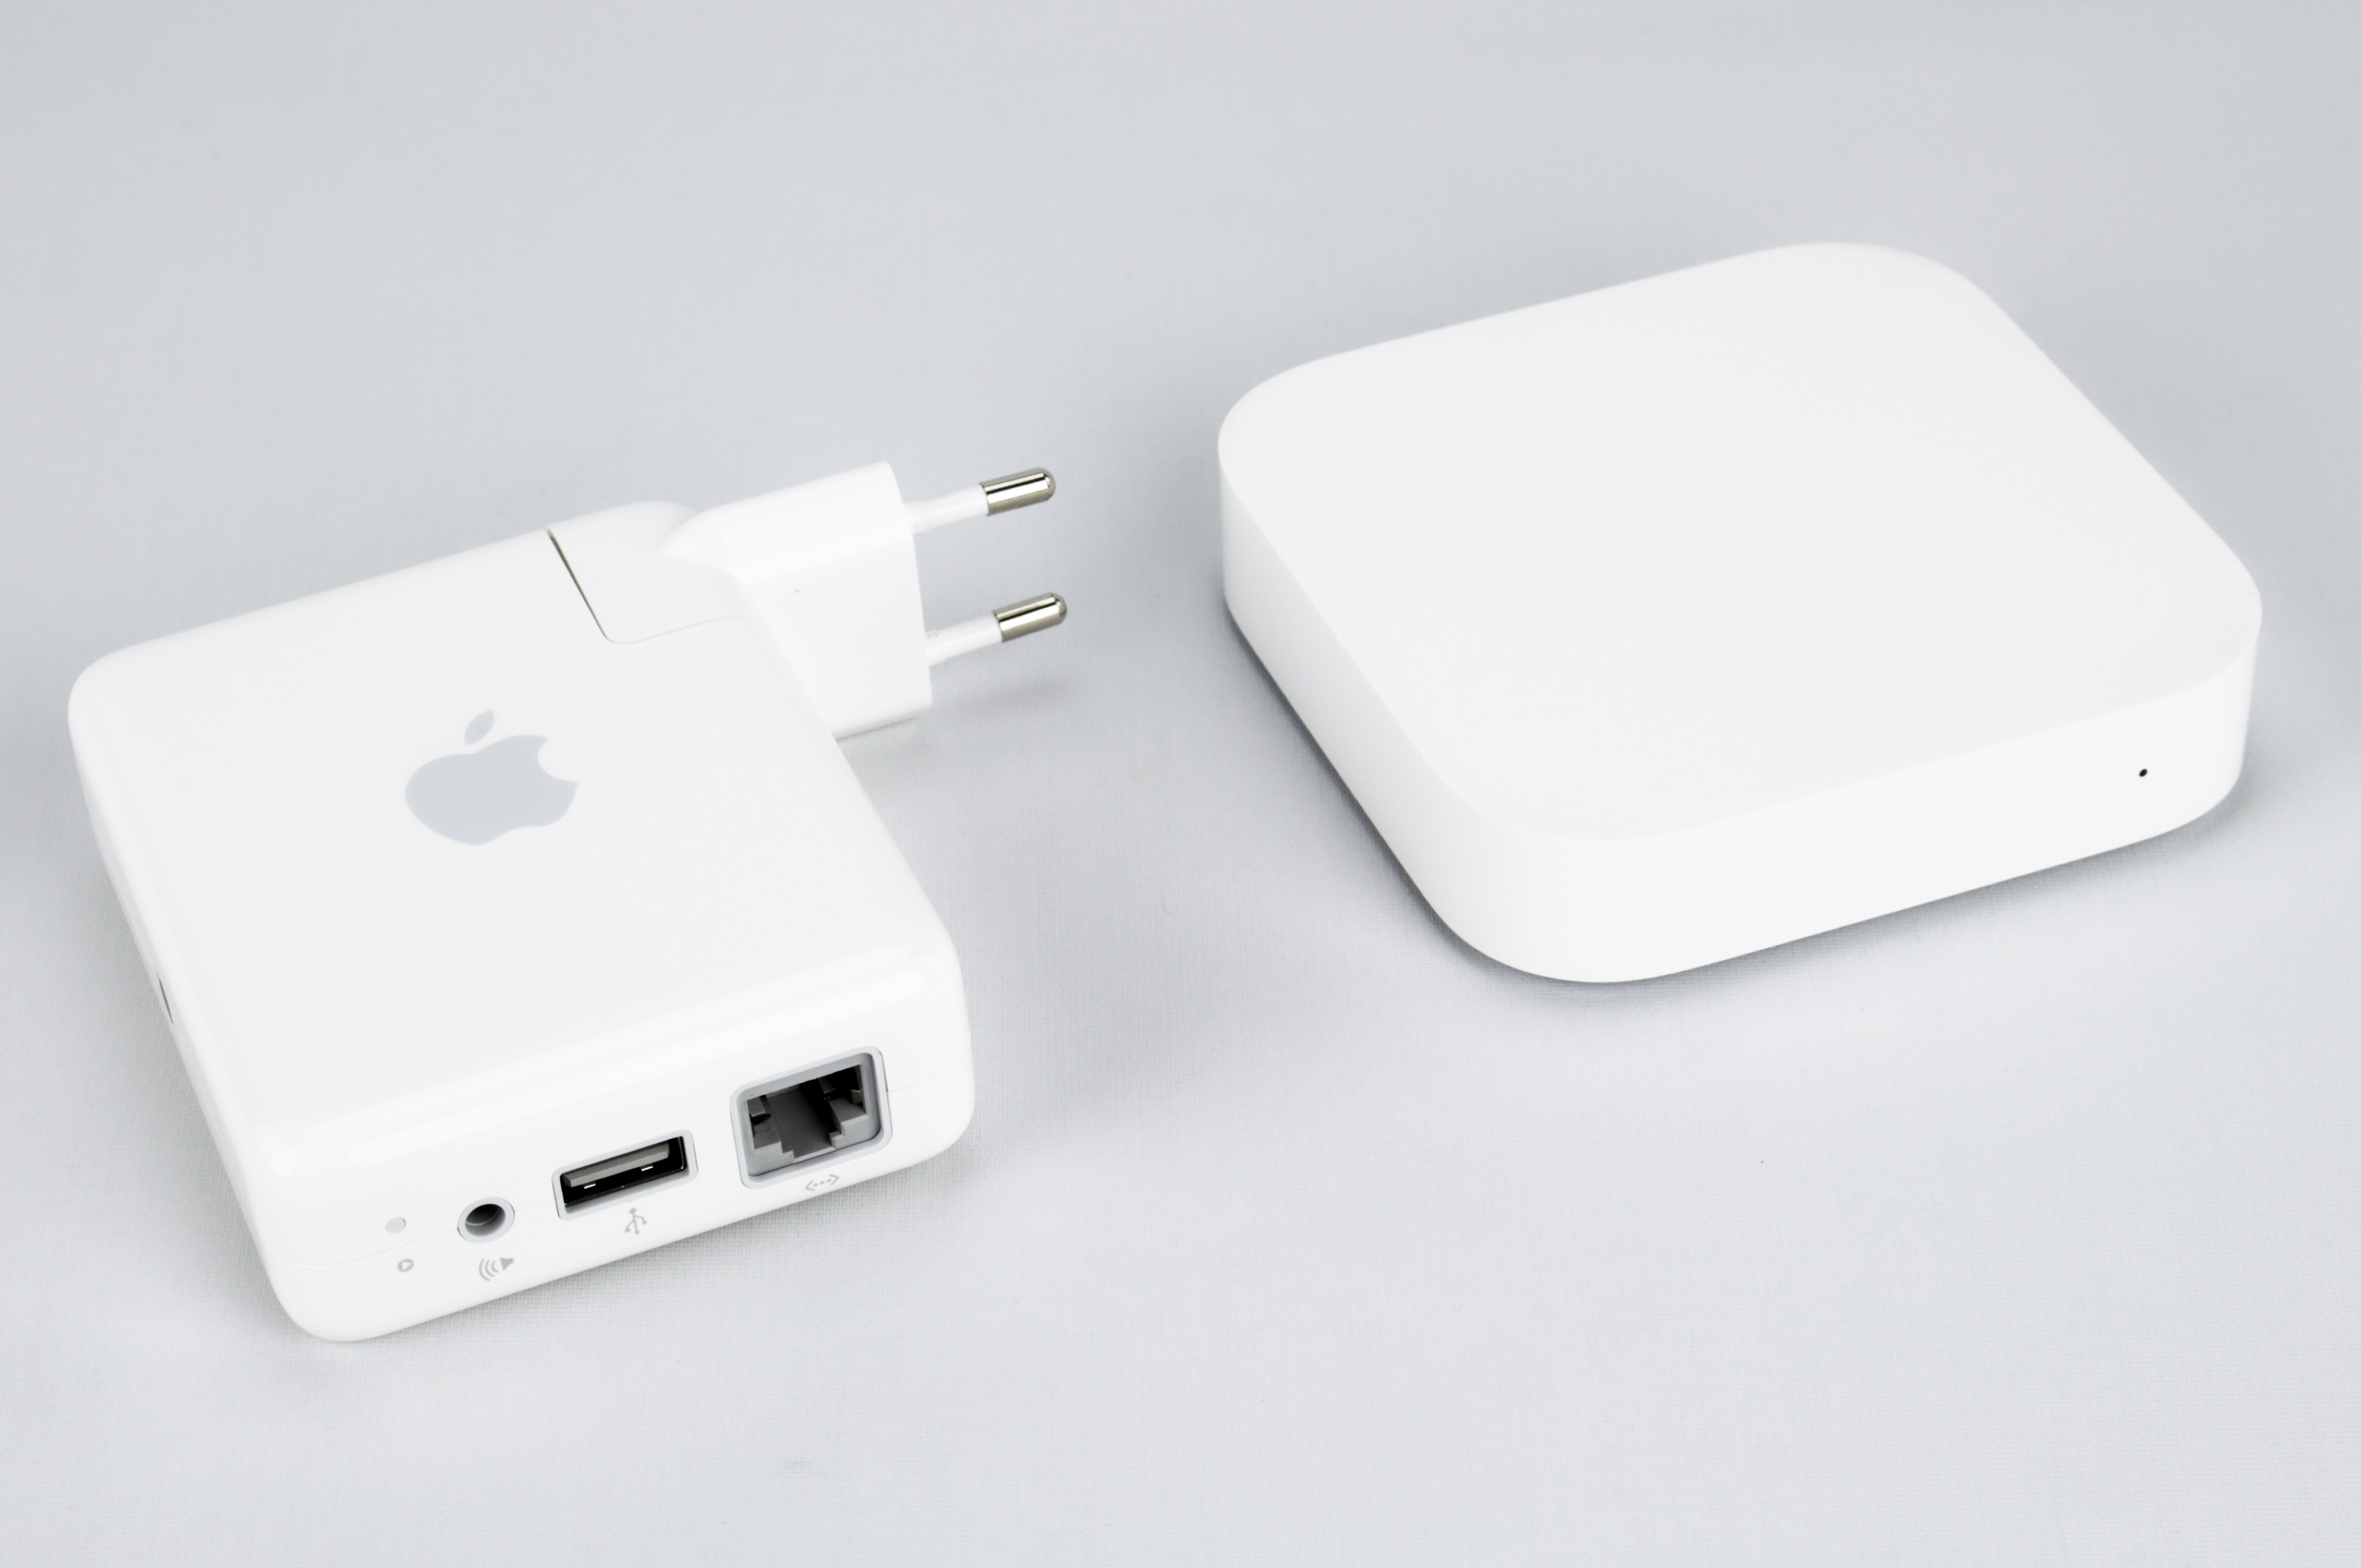 Svare Kondensere Tempel Referencing Apple WI-FI devices : Airport, Airport Extreme, Airport Express  and Airport Time Capsule - Freney.net